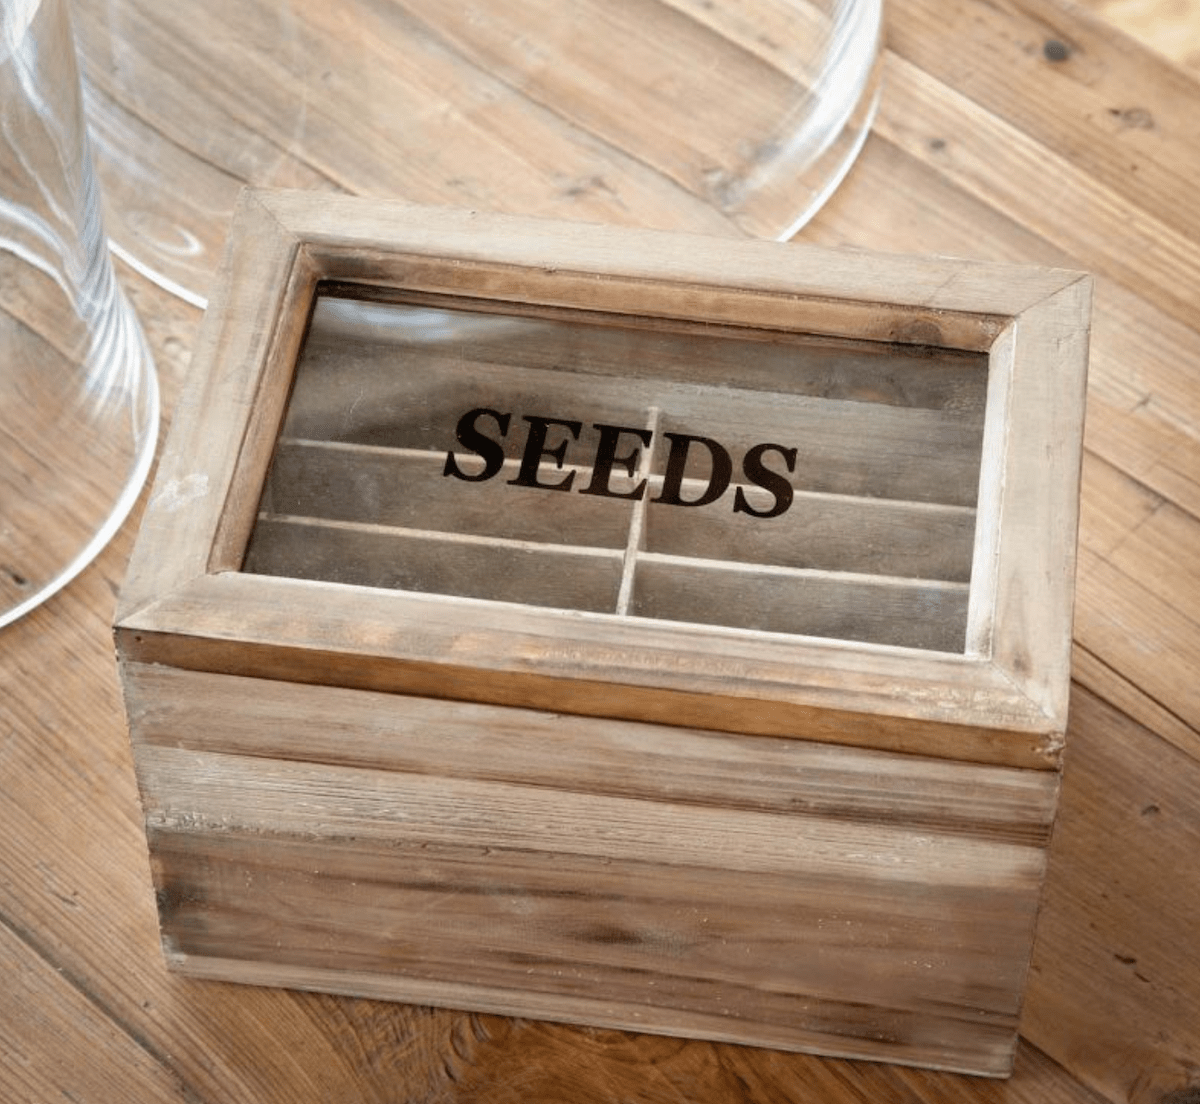 The Best Seed Organizer & Seed Storage Solution • The Rustic Elk